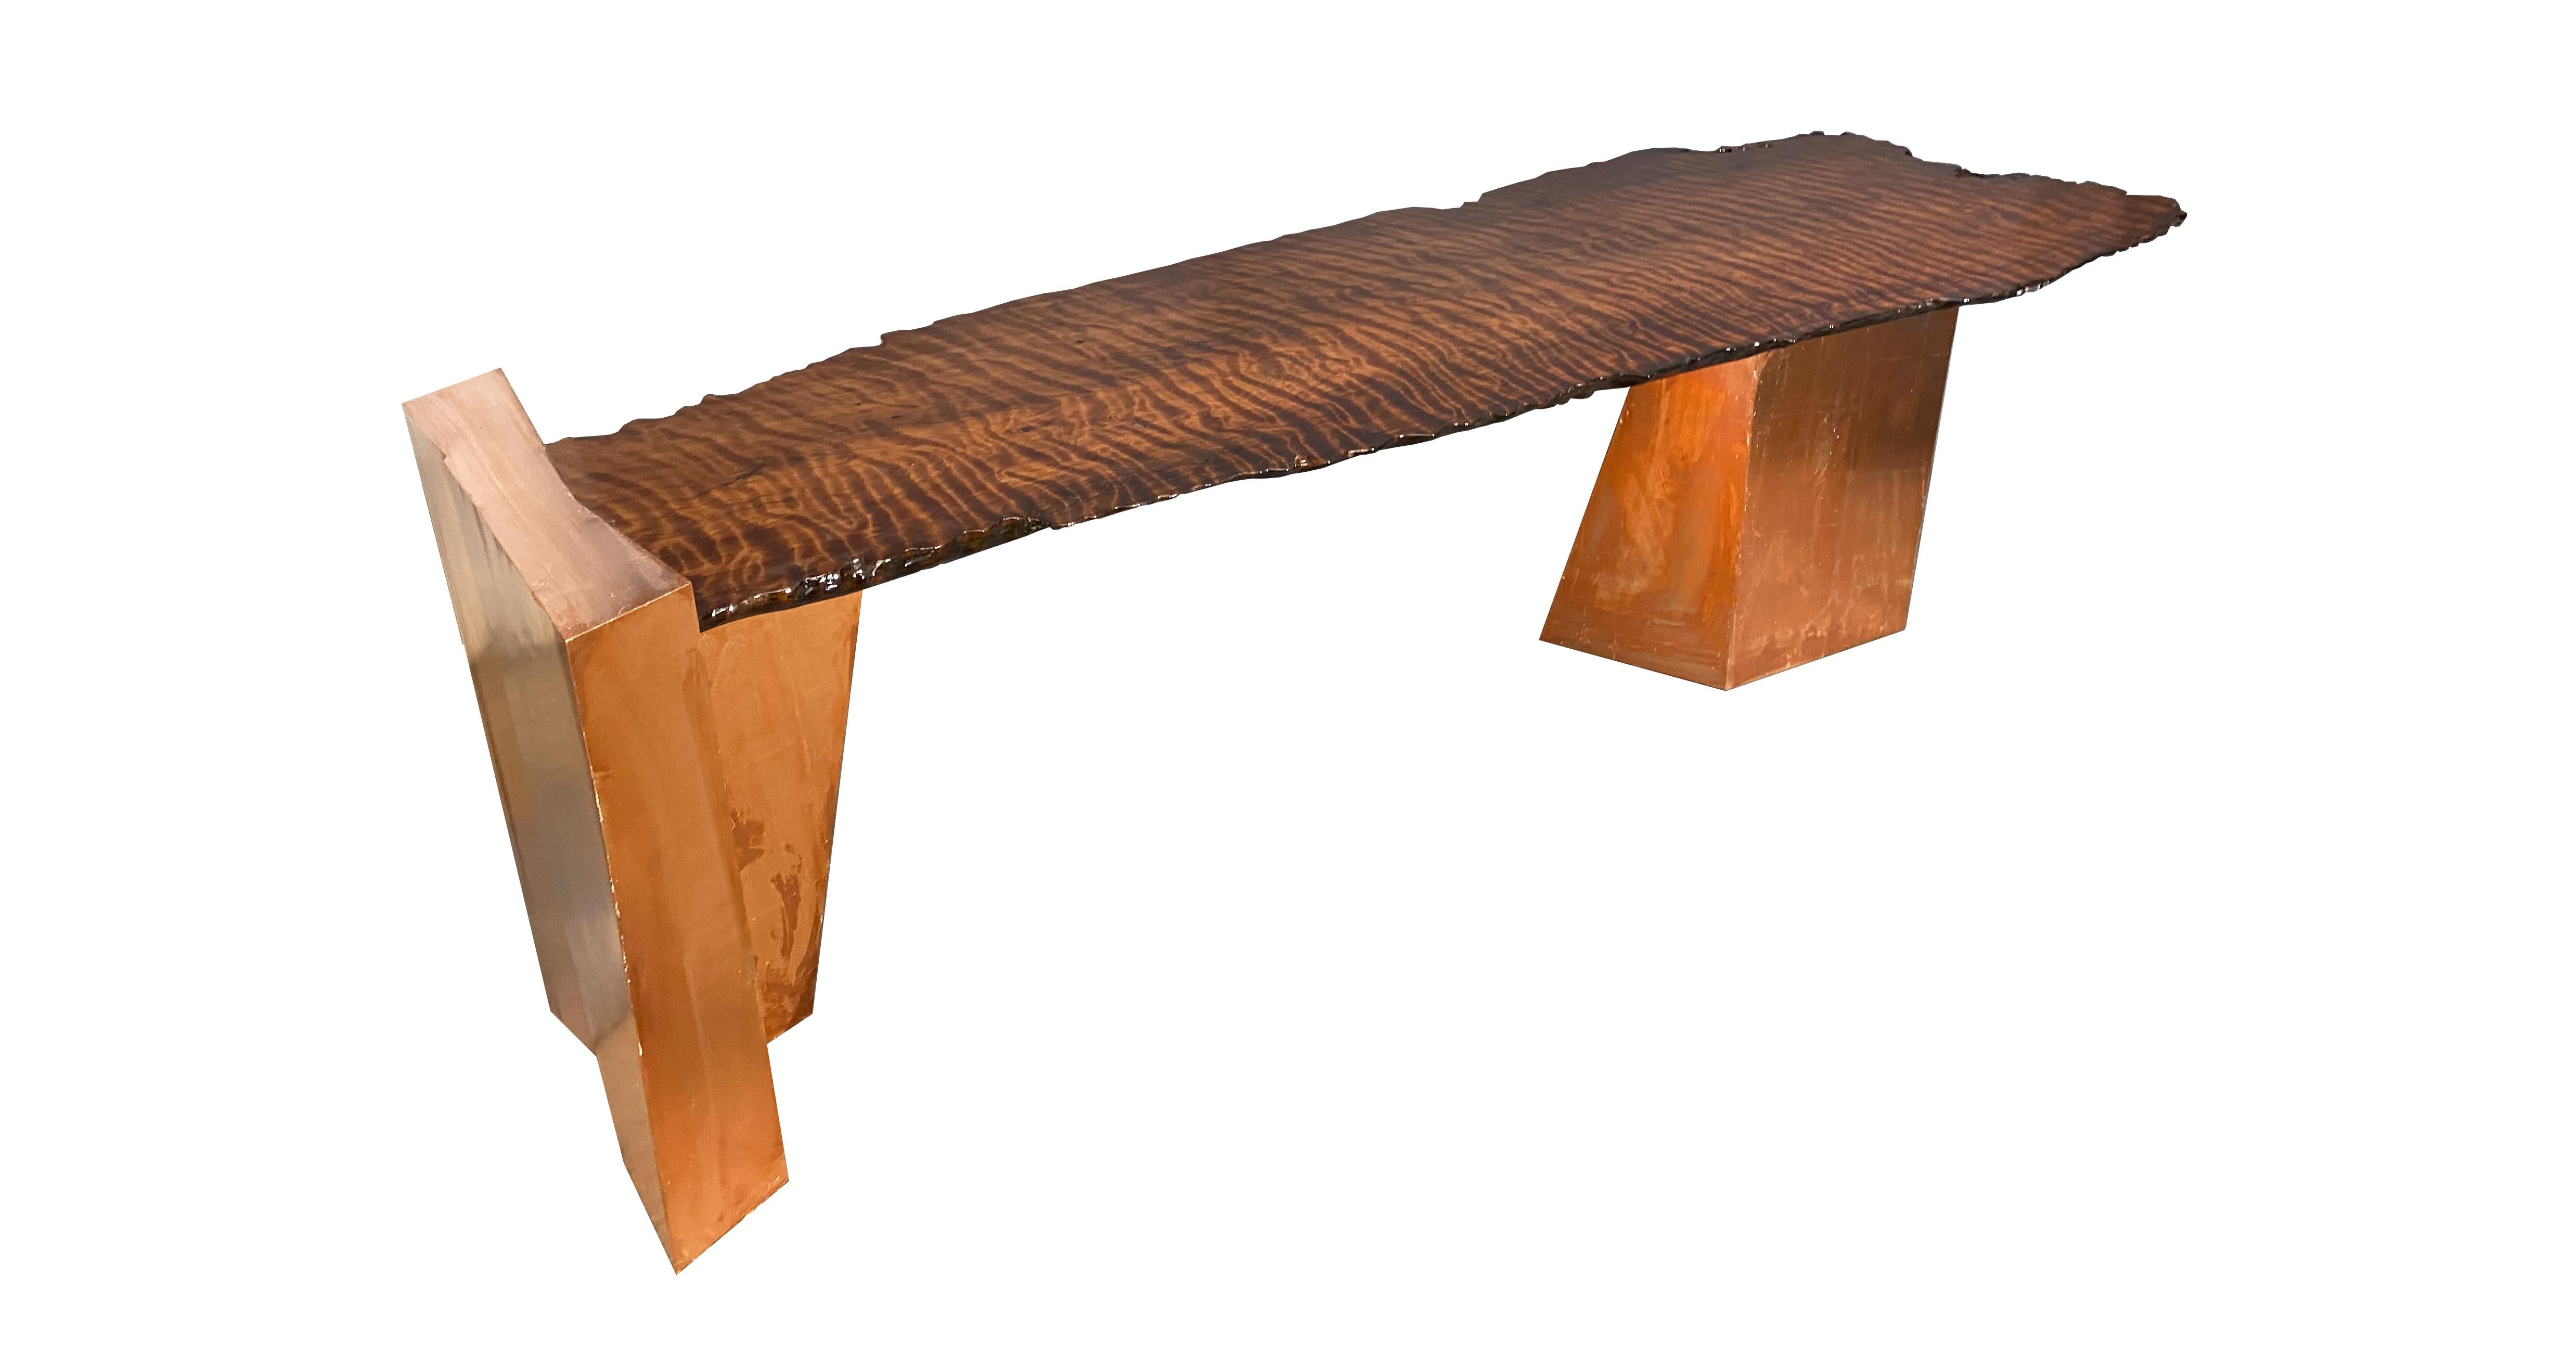 Form: A Natural Live Edge Coffee Table 
 
Materials: Solid American “Old Growth” highly figured Coastal Redwood (Sequoia sempervirens), FSA Certified Baltic Birch veneer core plywood, Copper leaf, moderately low VOC clear coating for the bases and